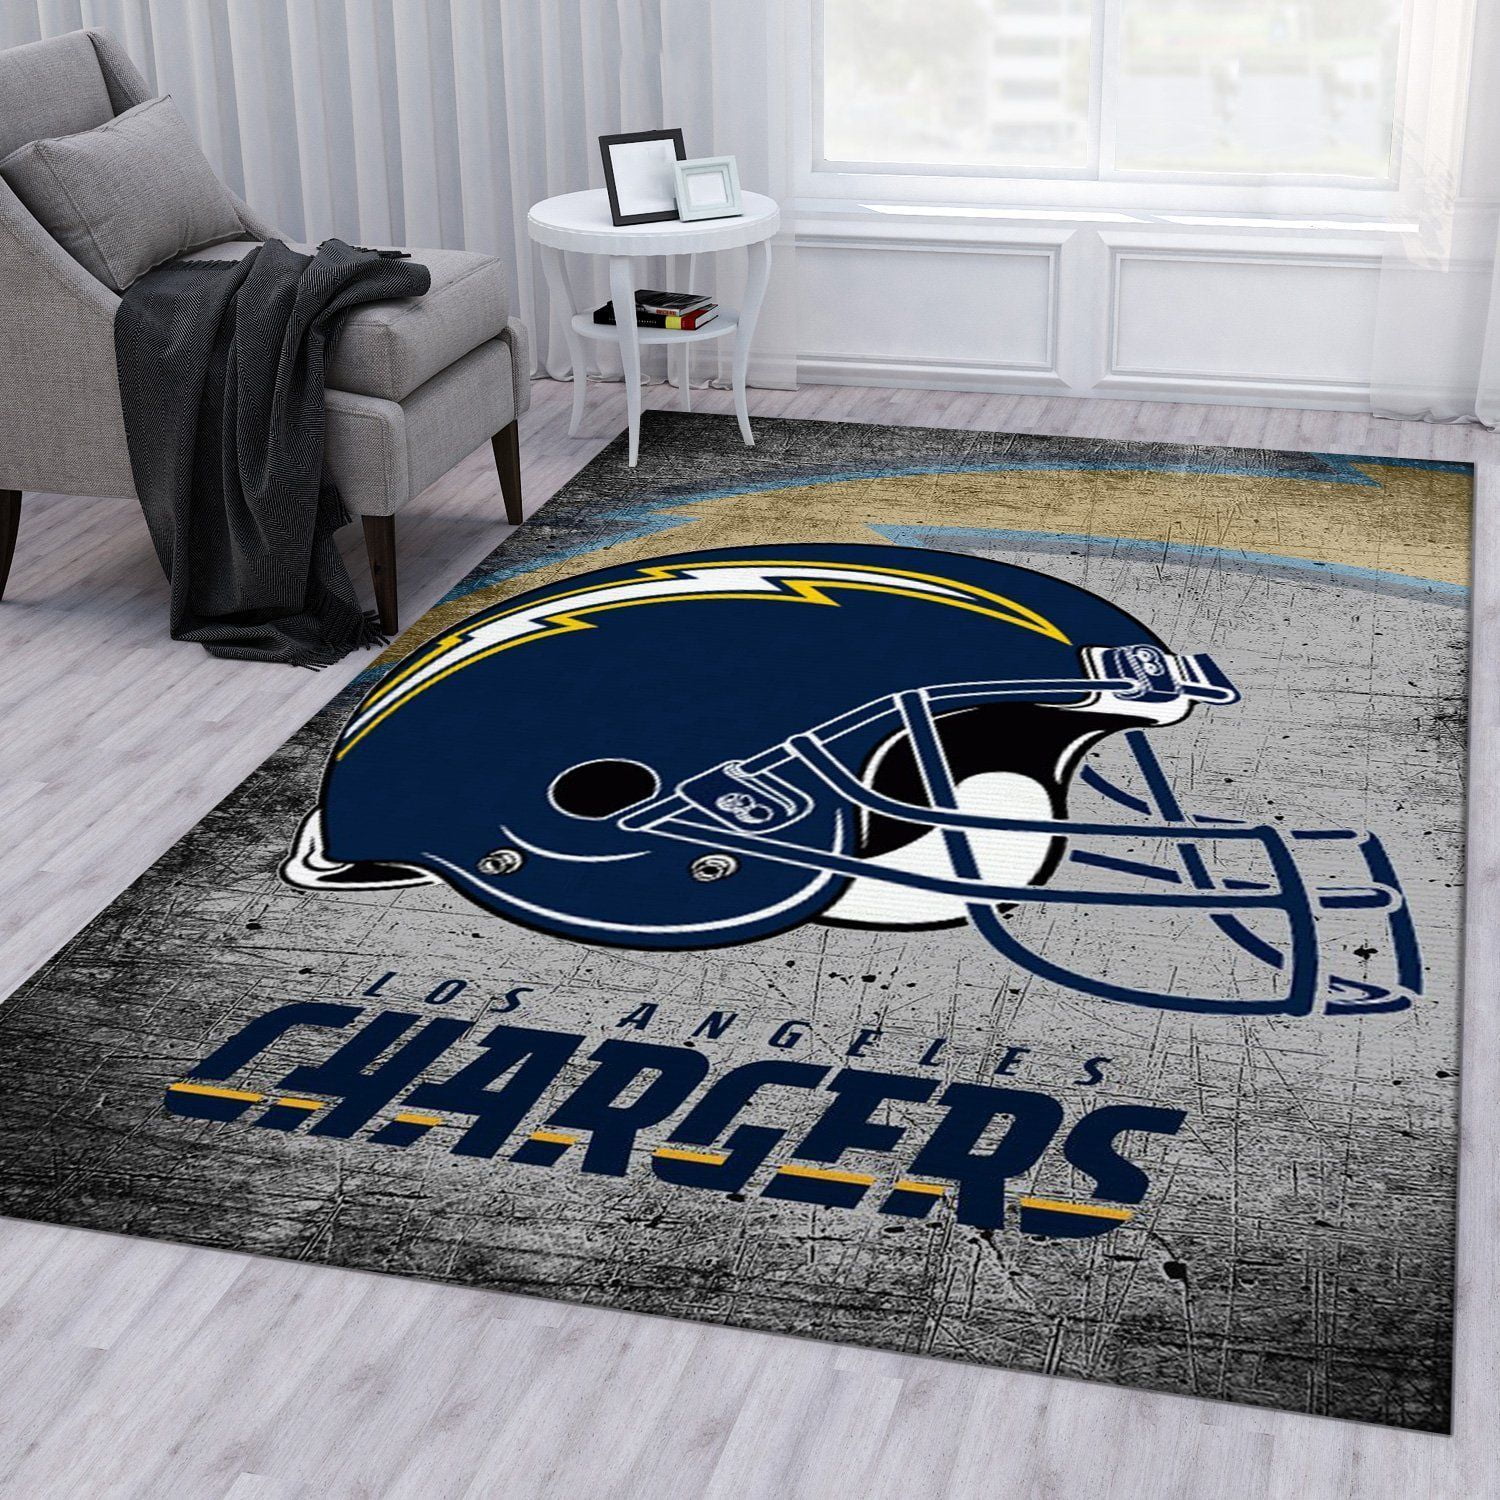 Los Angeles Chargers Nfl Rug Living Room Rug Home Decor Floor Decor - Indoor Outdoor Rugs